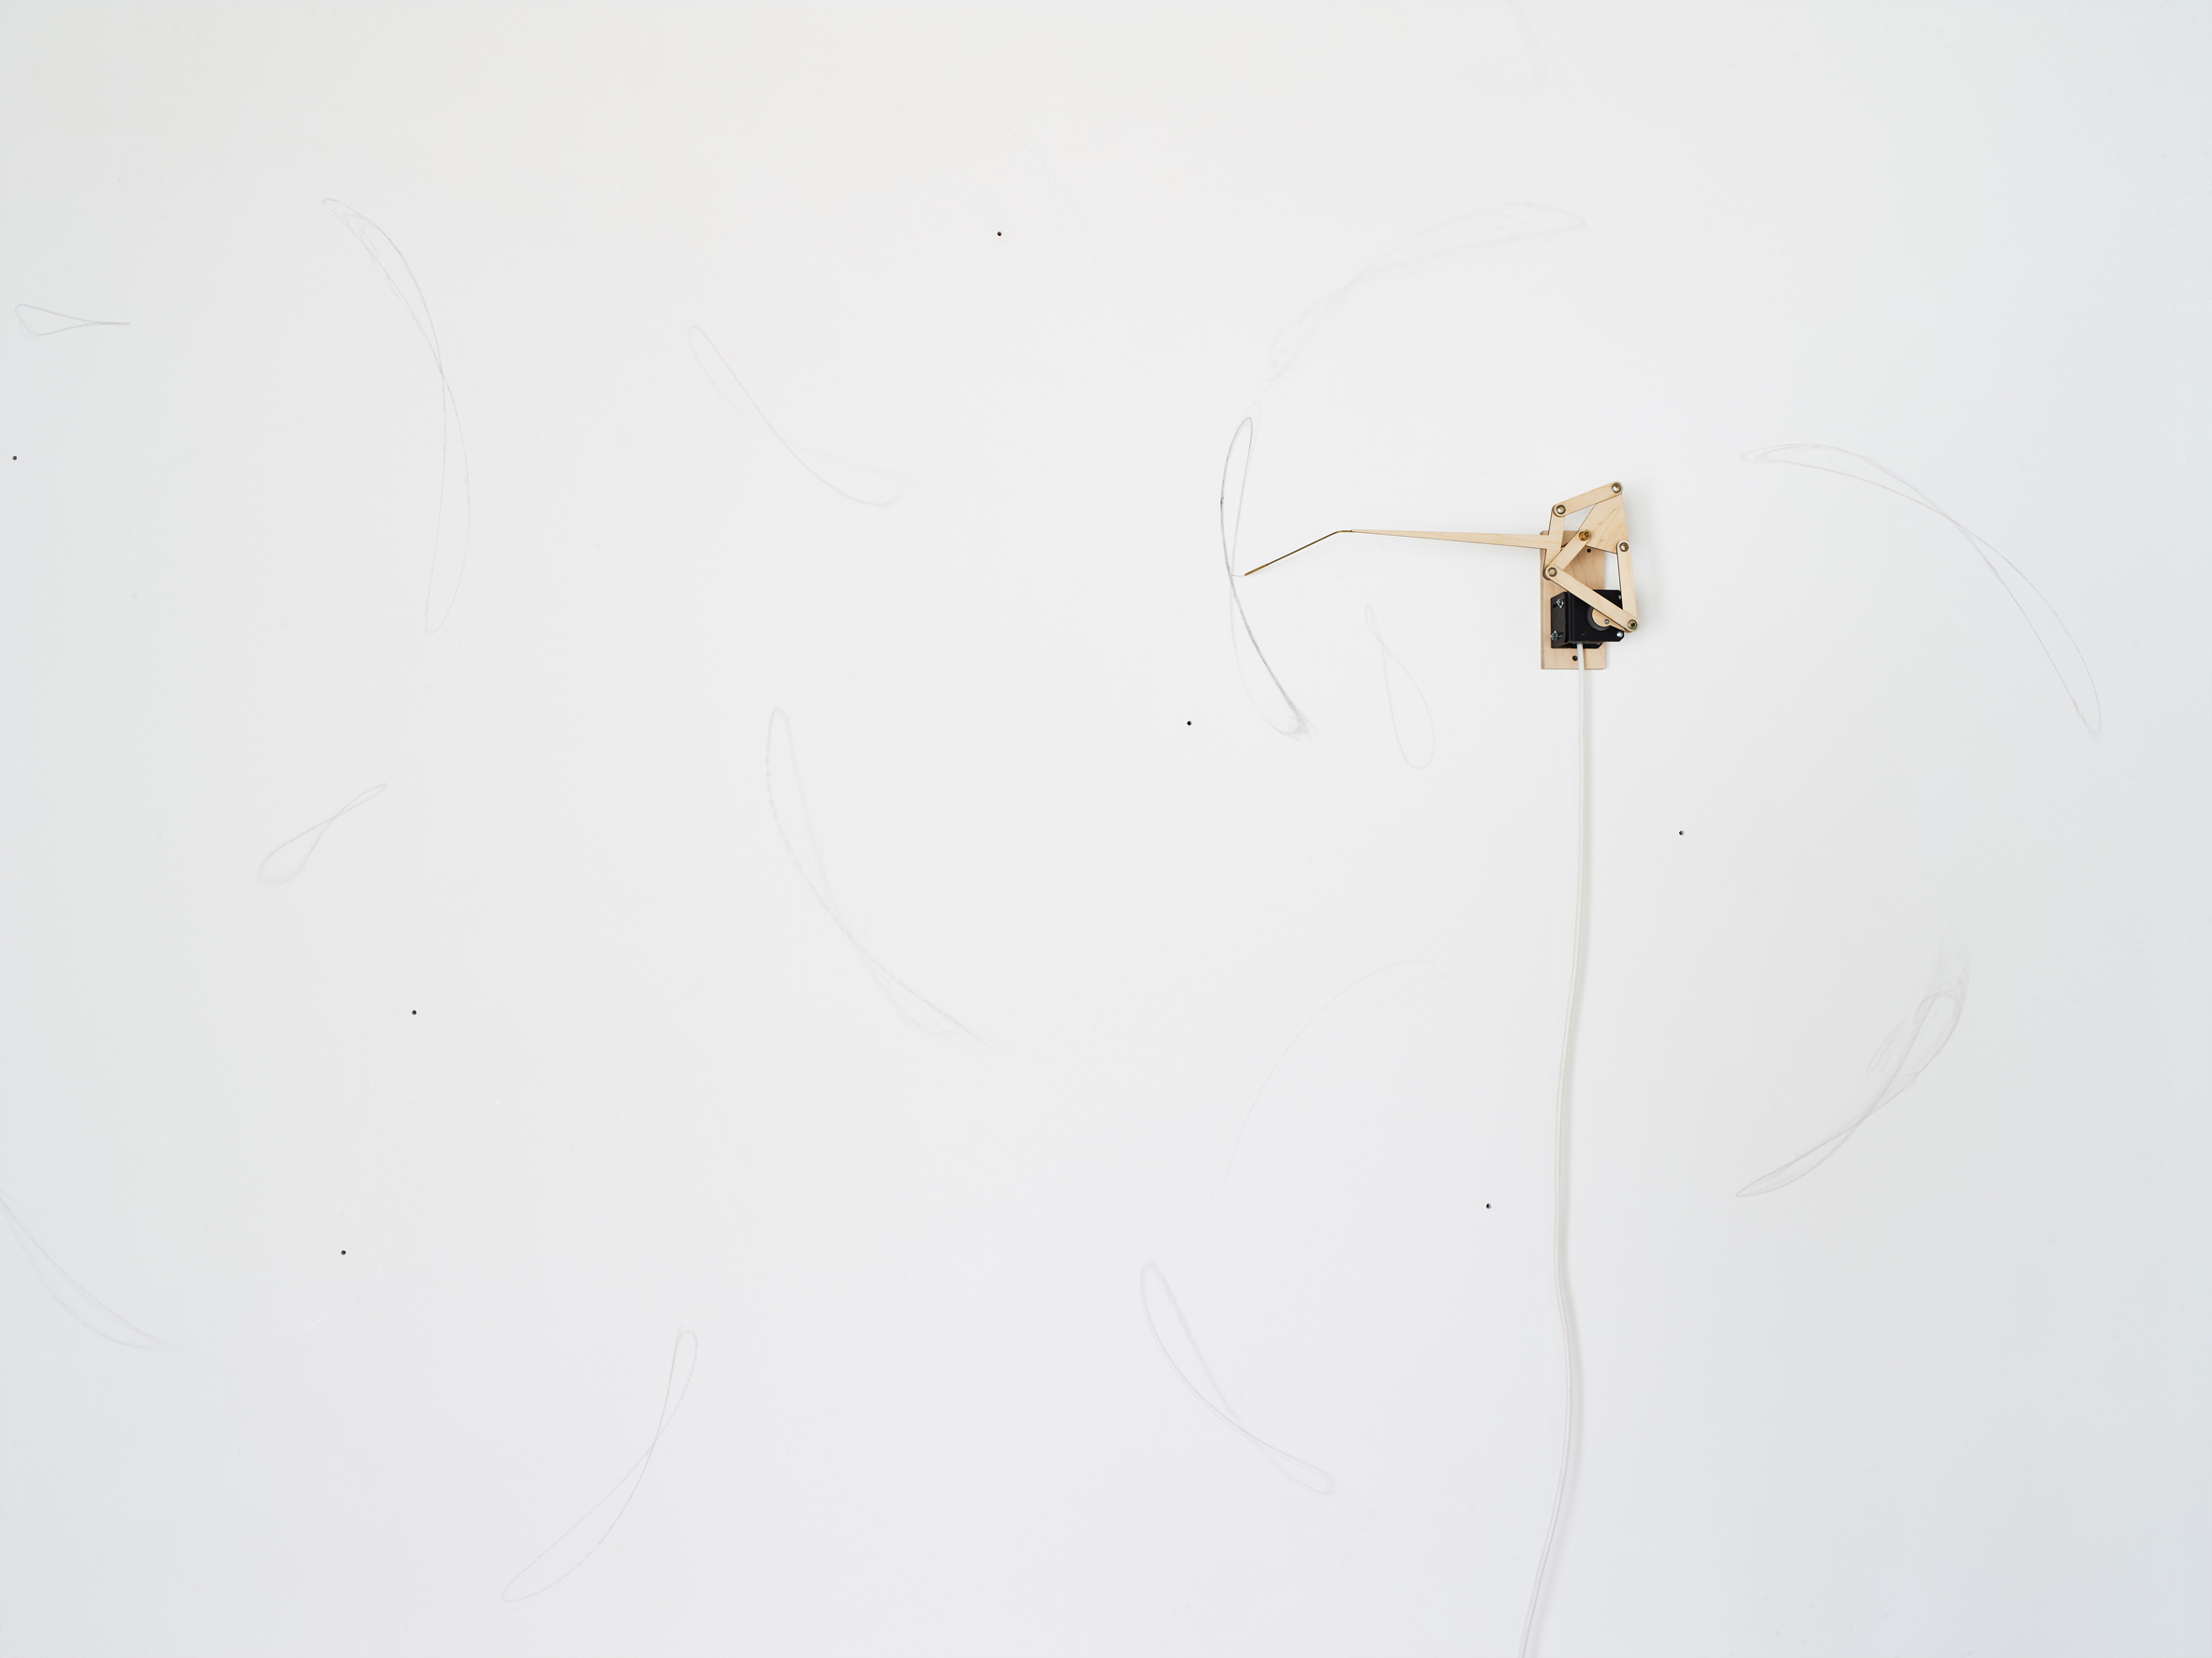 Truthplotter II, 2019, (detail), motor, Arduino, driver, power supply, cables, bearings, brass,  birch plywood, adhesives, silver and wall